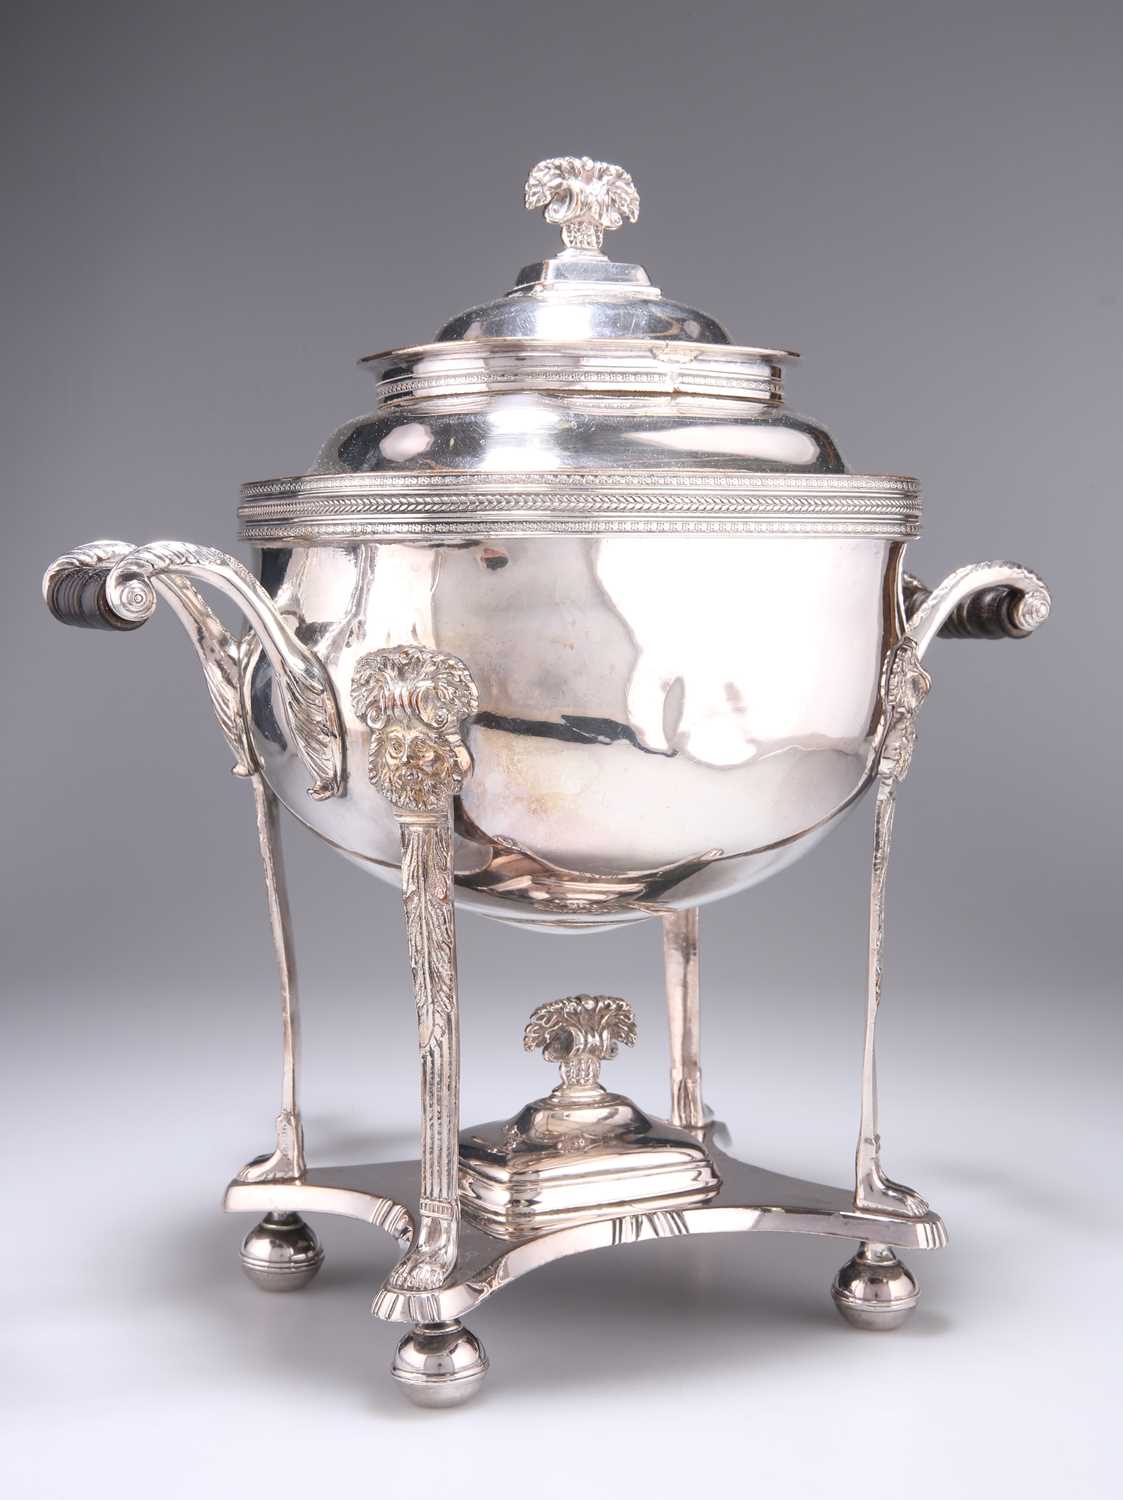 A REGENCY SILVER-PLATED SAMOVAR, EARLY 19TH CENTURY - Image 4 of 4